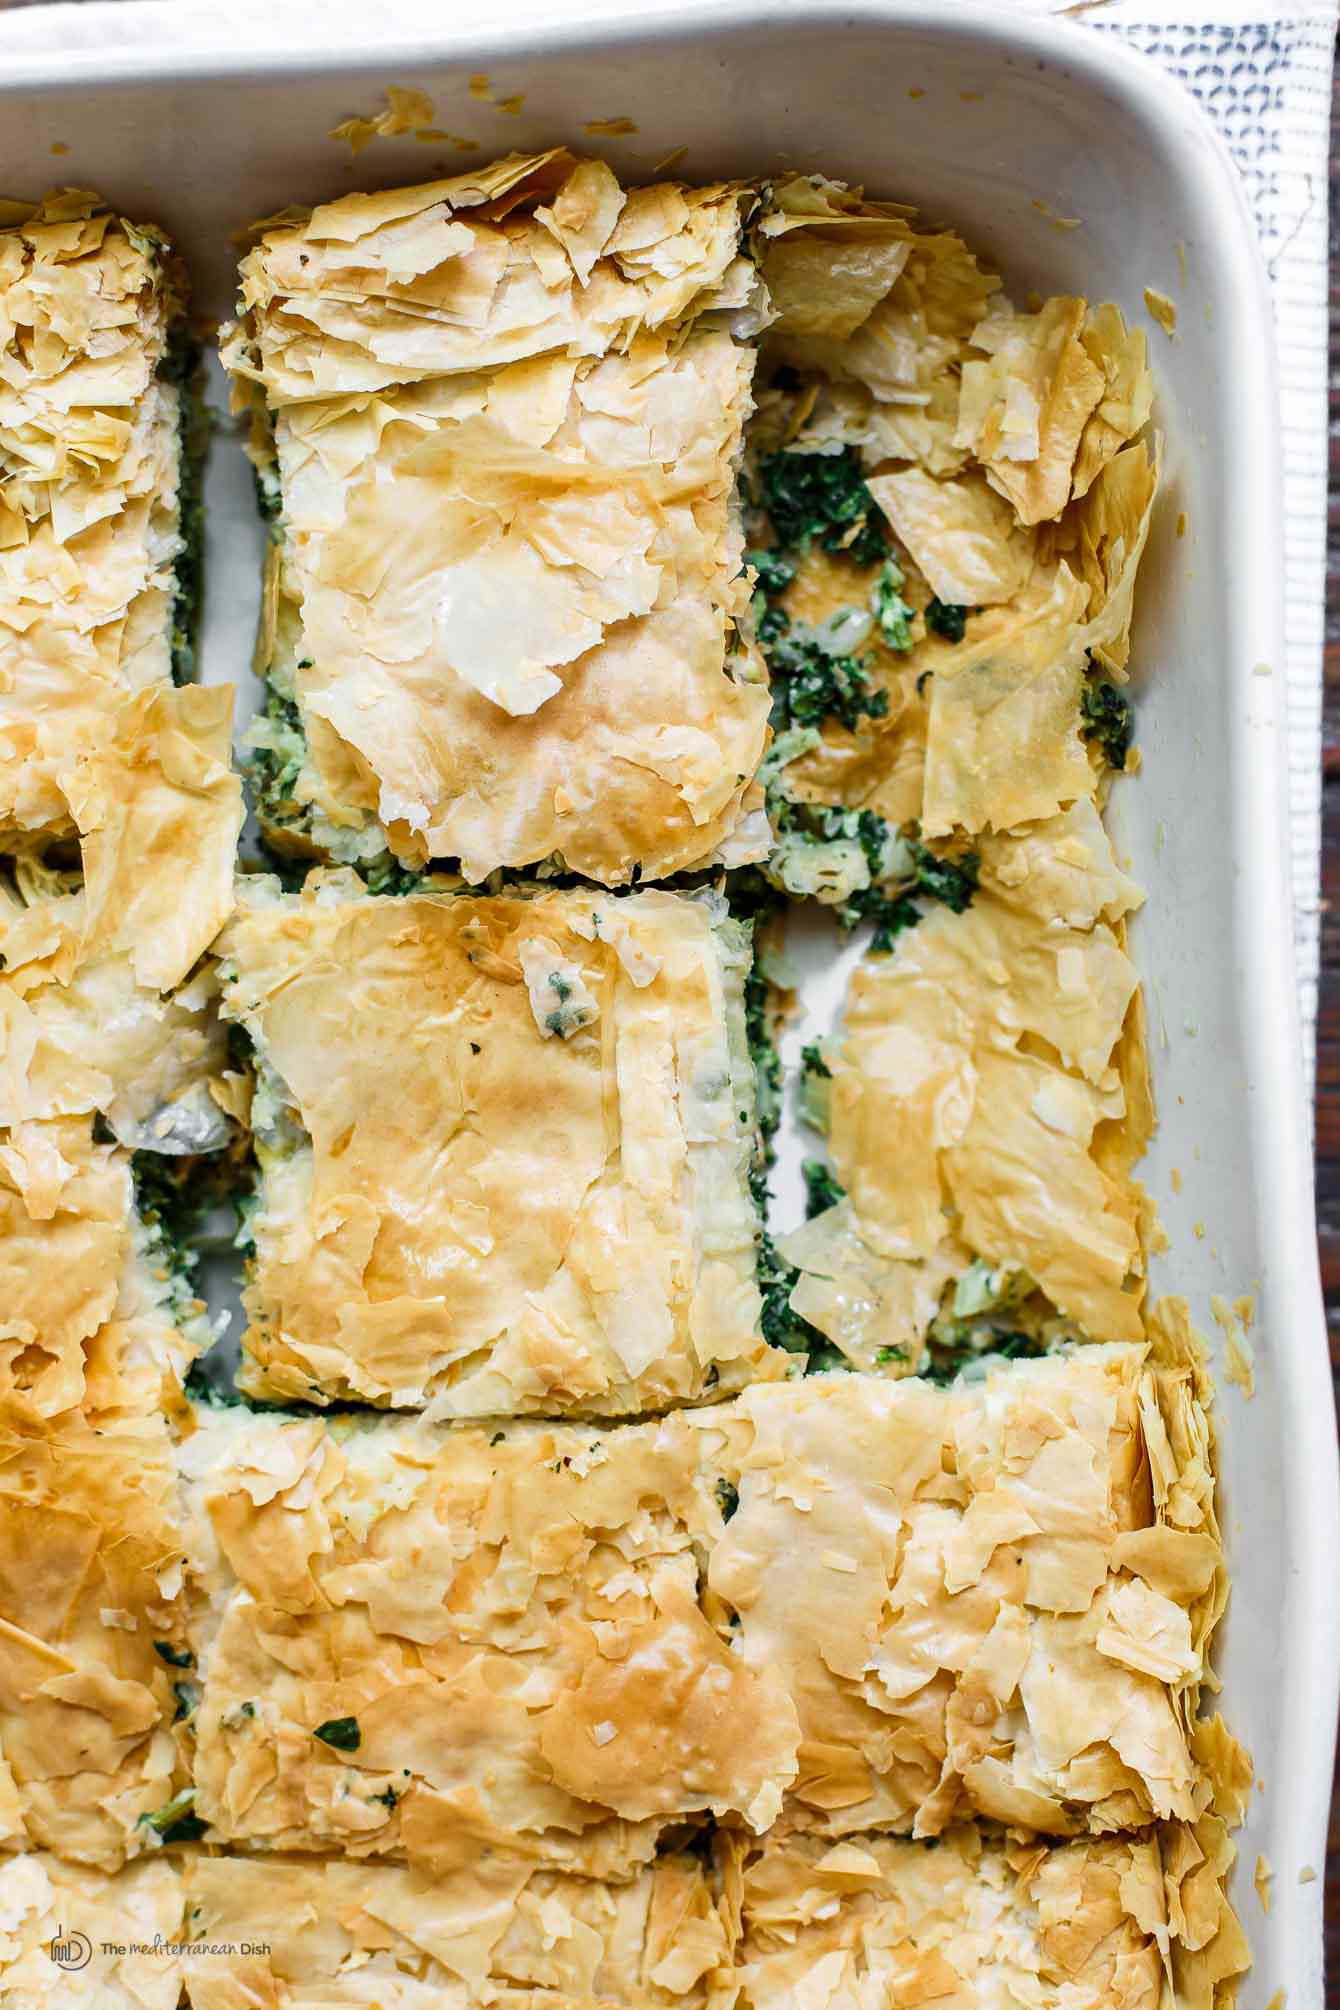 Spanakopita Recipe (Greek Spinach Pie) | The Mediterranean Dish. The best tutorial for how to make spanakopita. Greek spinach pie with crispy, golden phyllo and a soft filling of spinach, feta cheese, and herbs. A holiday recipe for make it for dinner! So easy. See it at TheMediterraneanDish.com